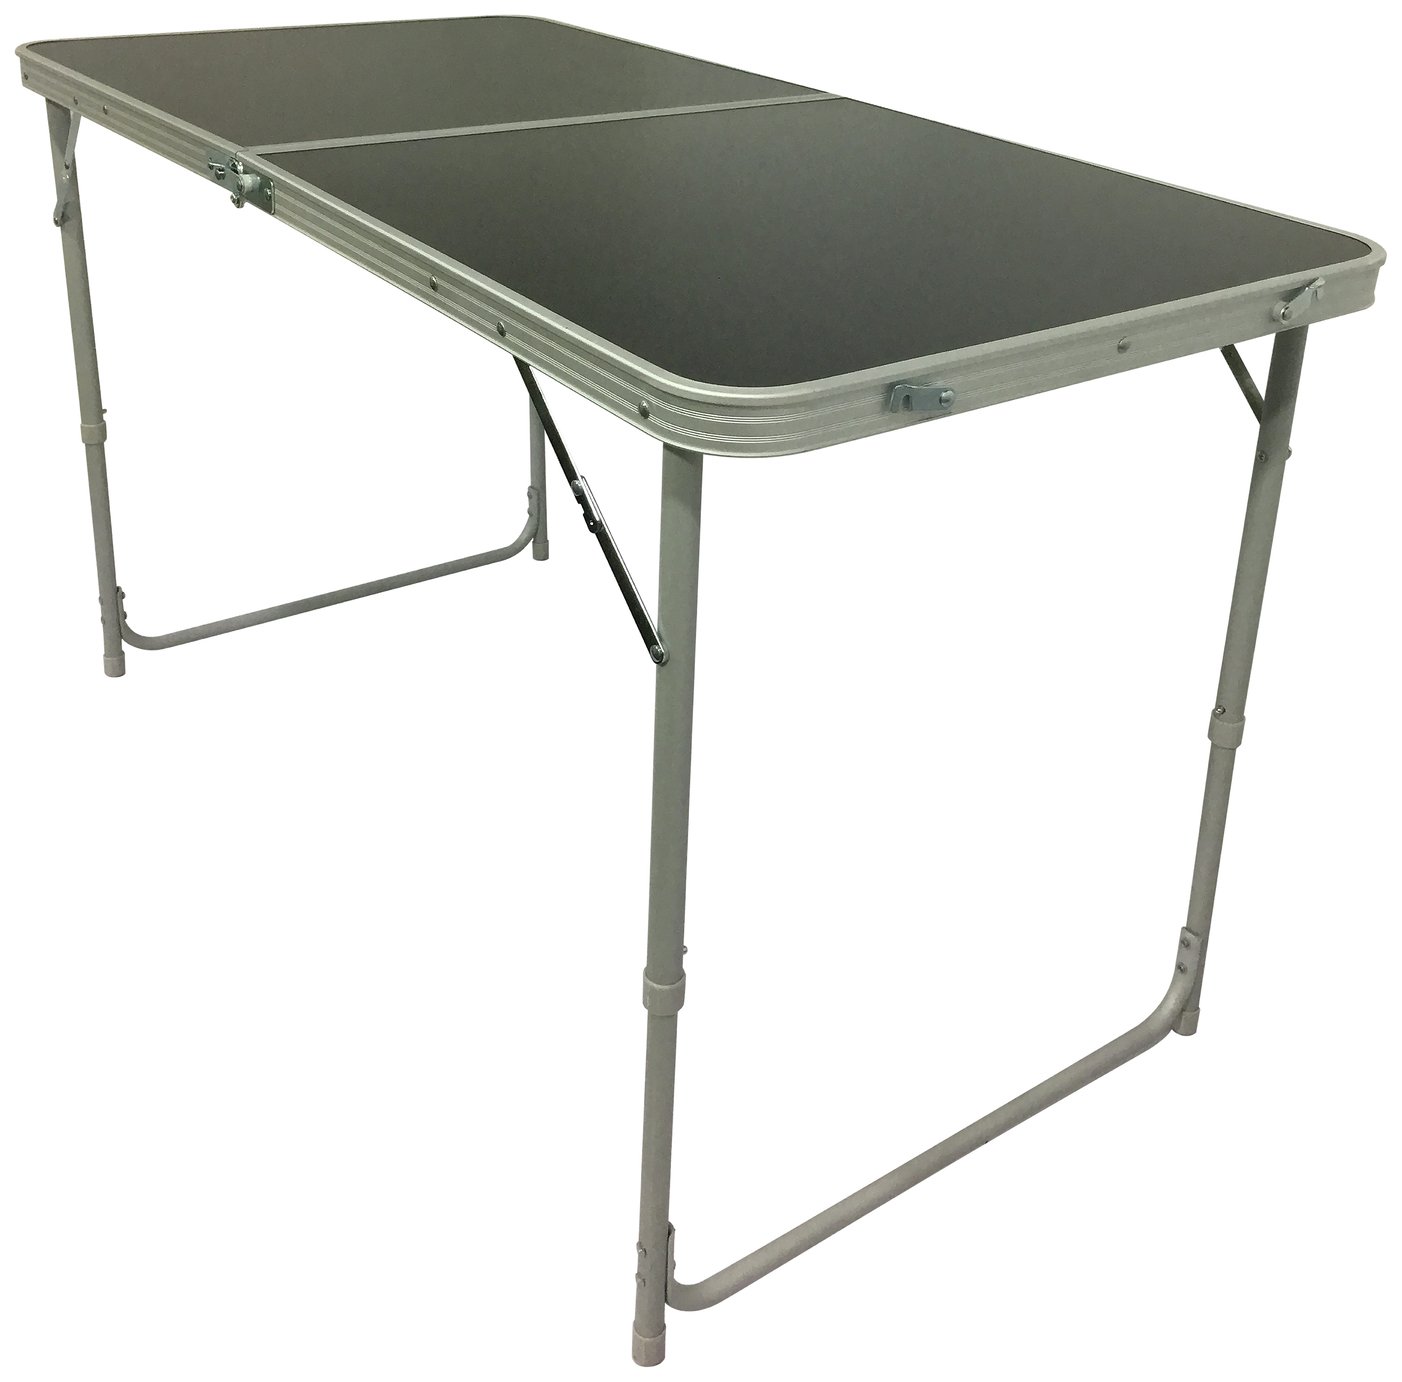 Twin Height Folding Aluminium Table review